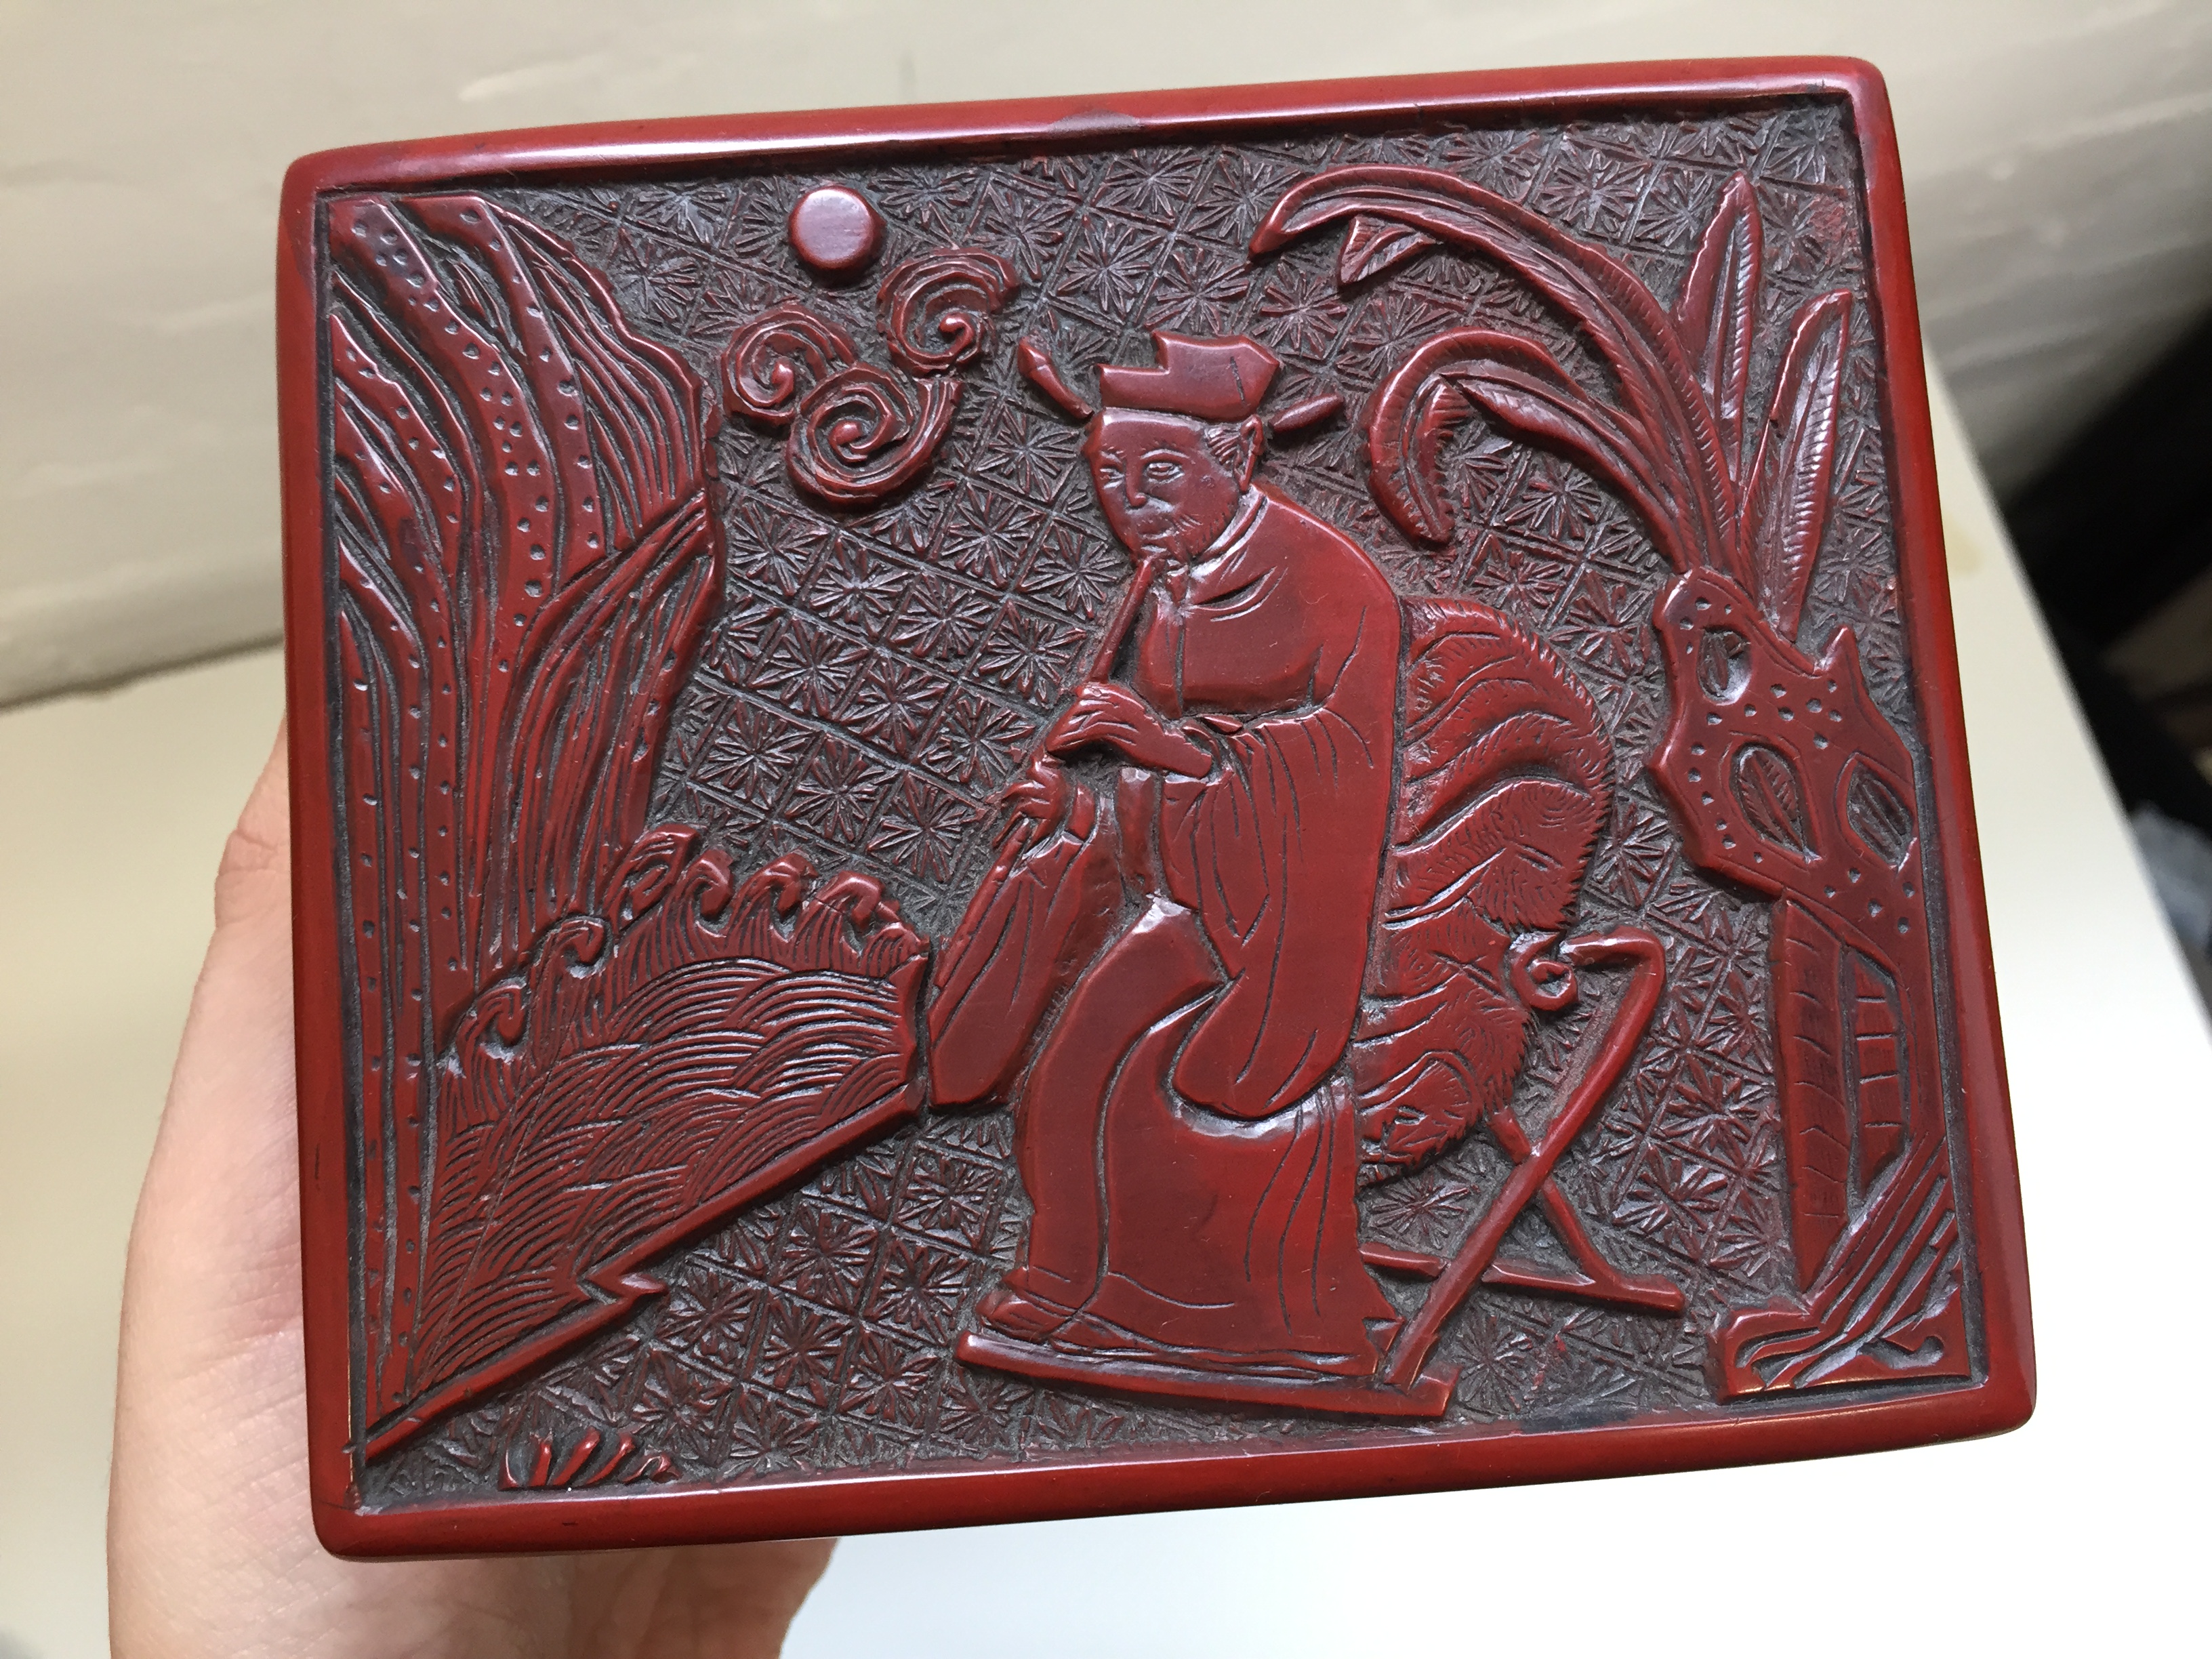 A CHINESE CINNABAR LACQUER 'MUSICIAN' BOX AND COVER 晚明 剔紅圖高士行樂圖紋蓋盒 - Image 3 of 20